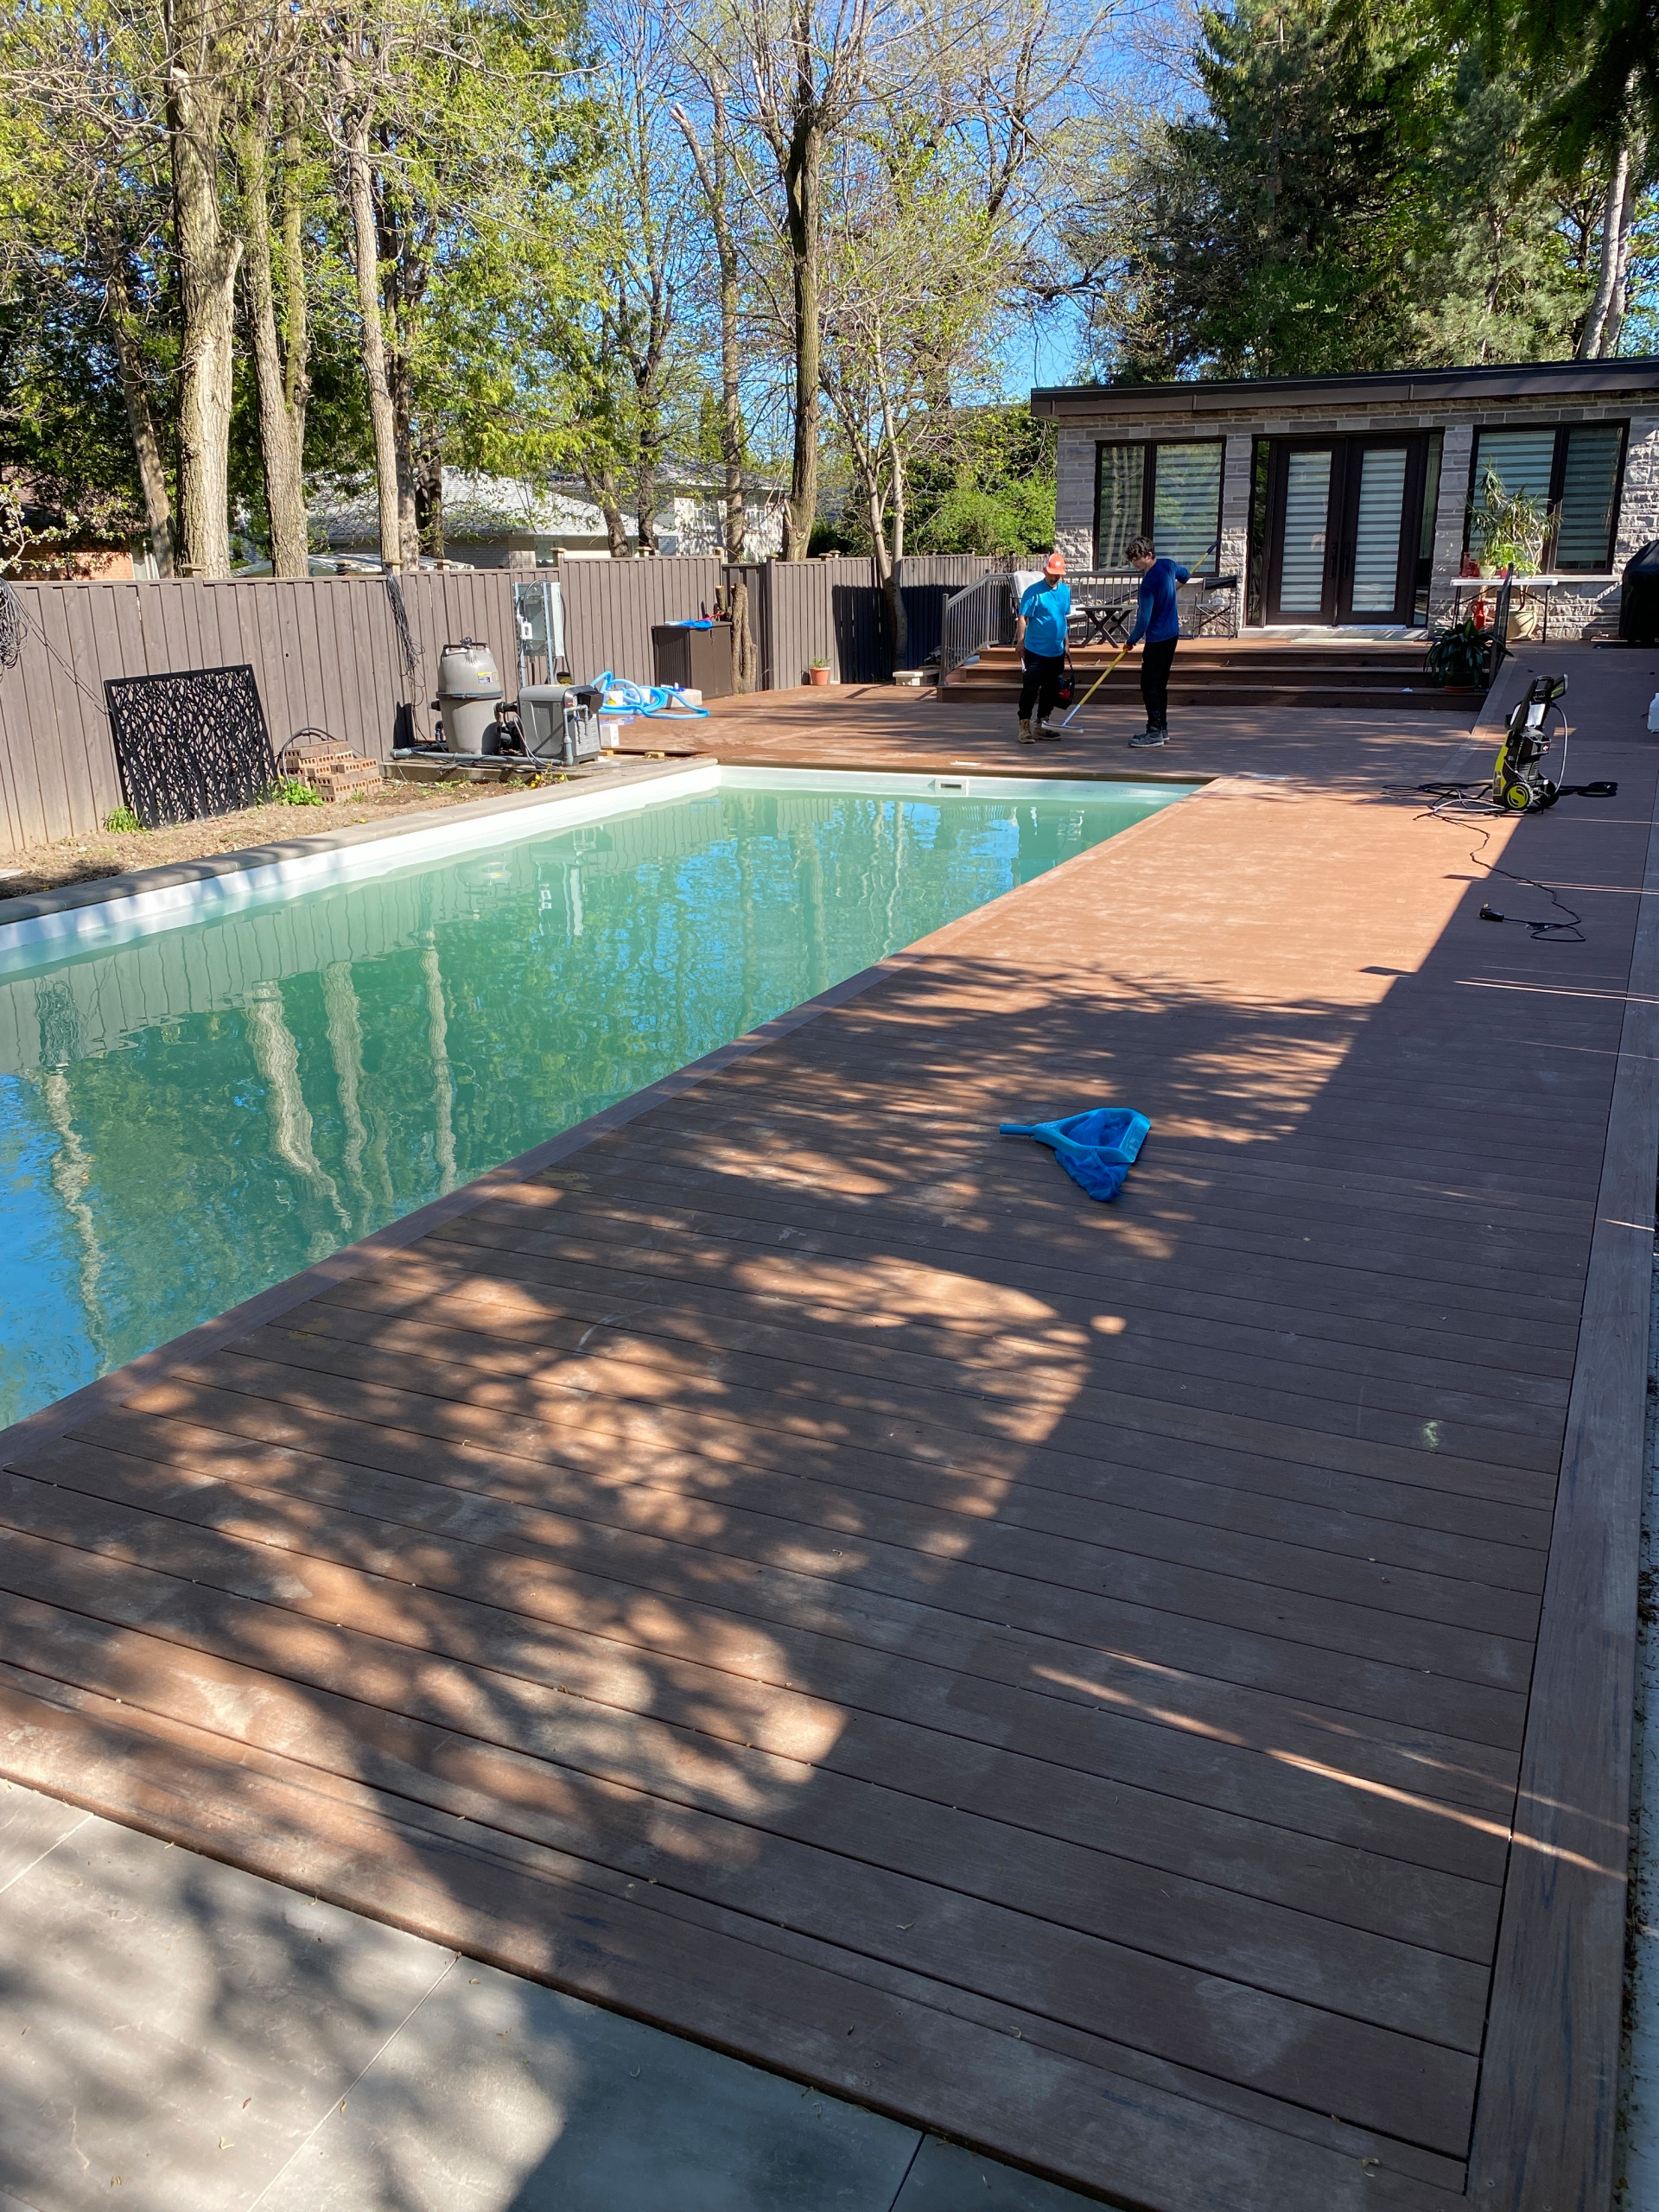 Wedgewood White Pool & Composite Decking